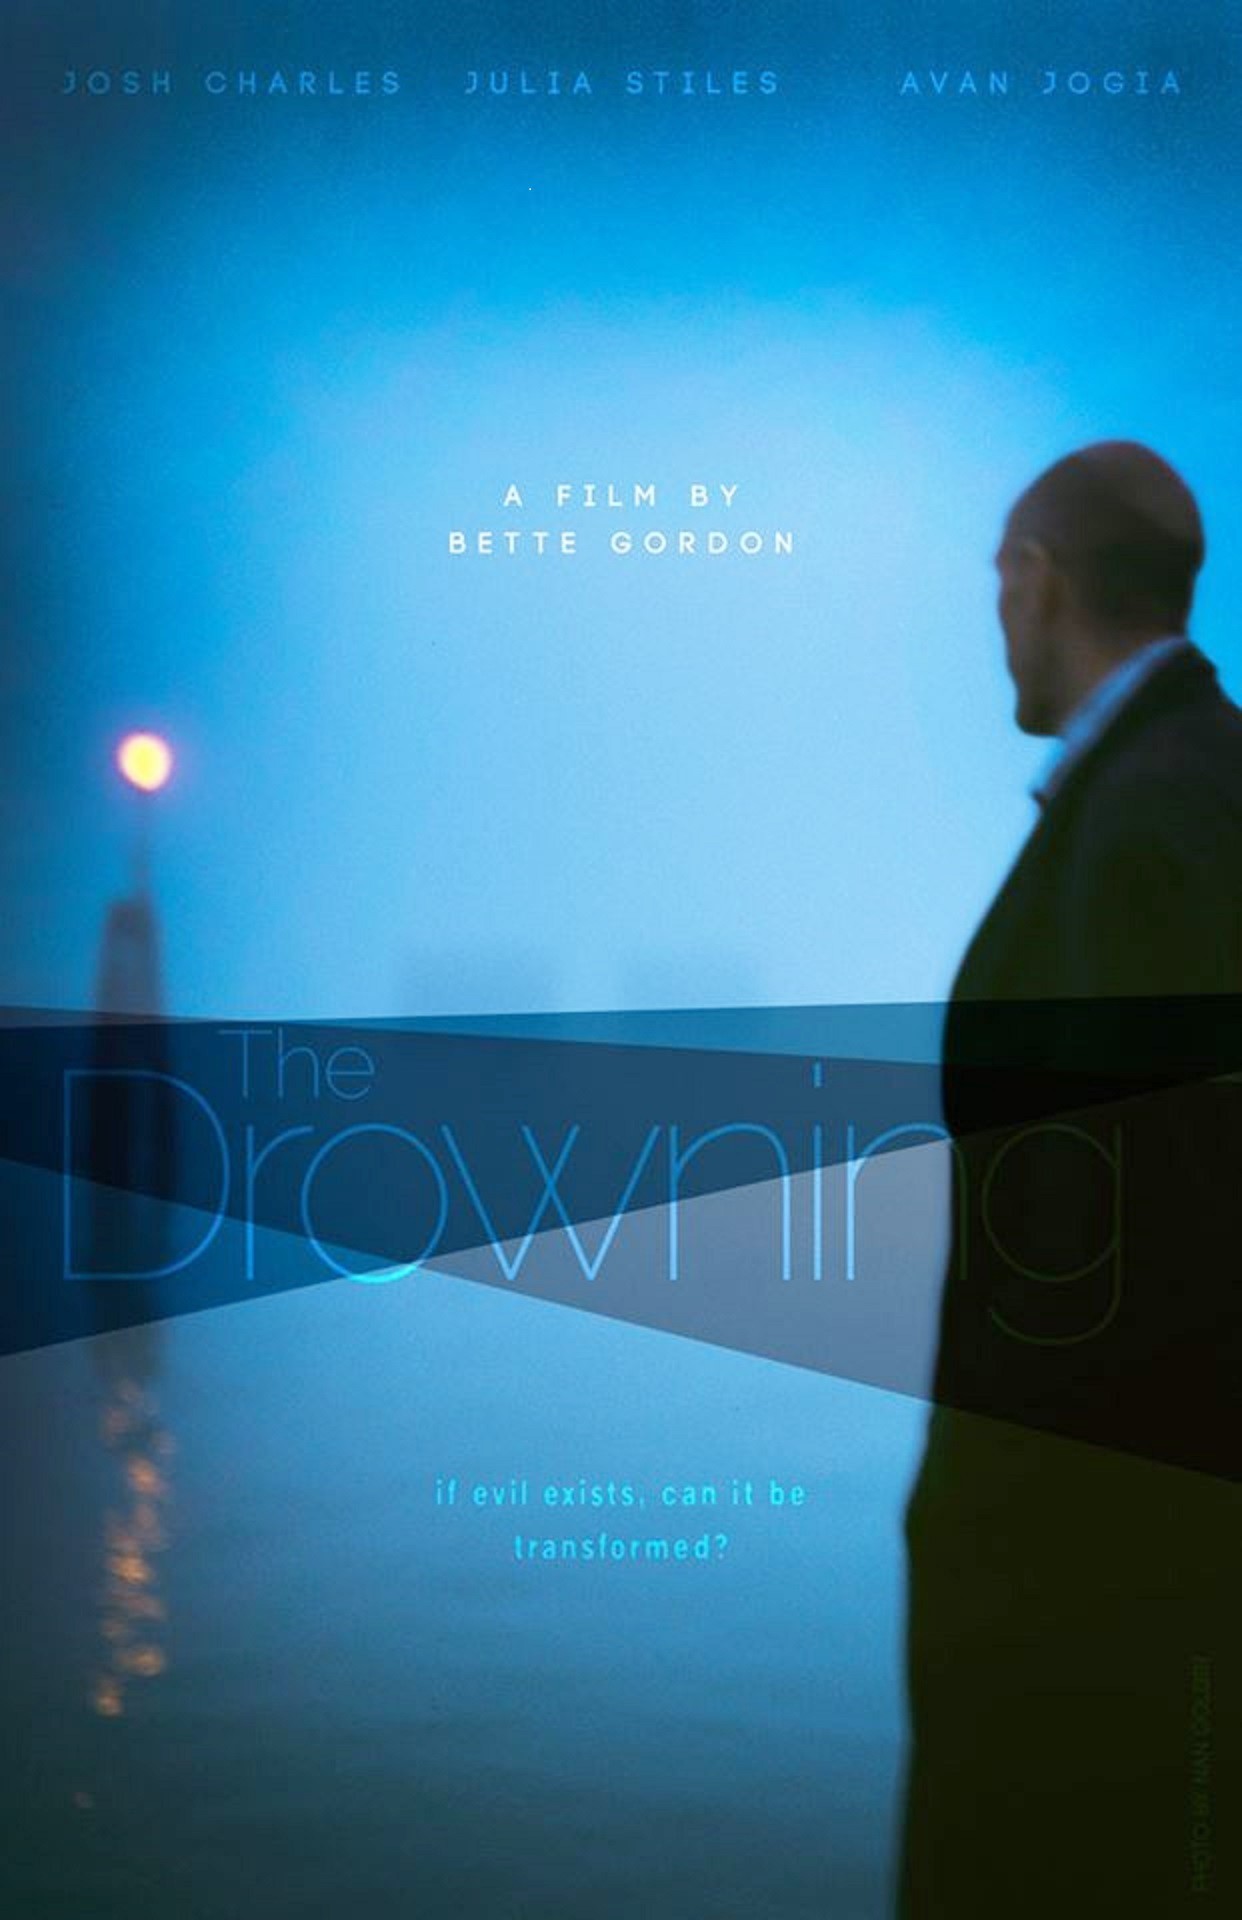 Poster of Paladin's The Drowning (2017)